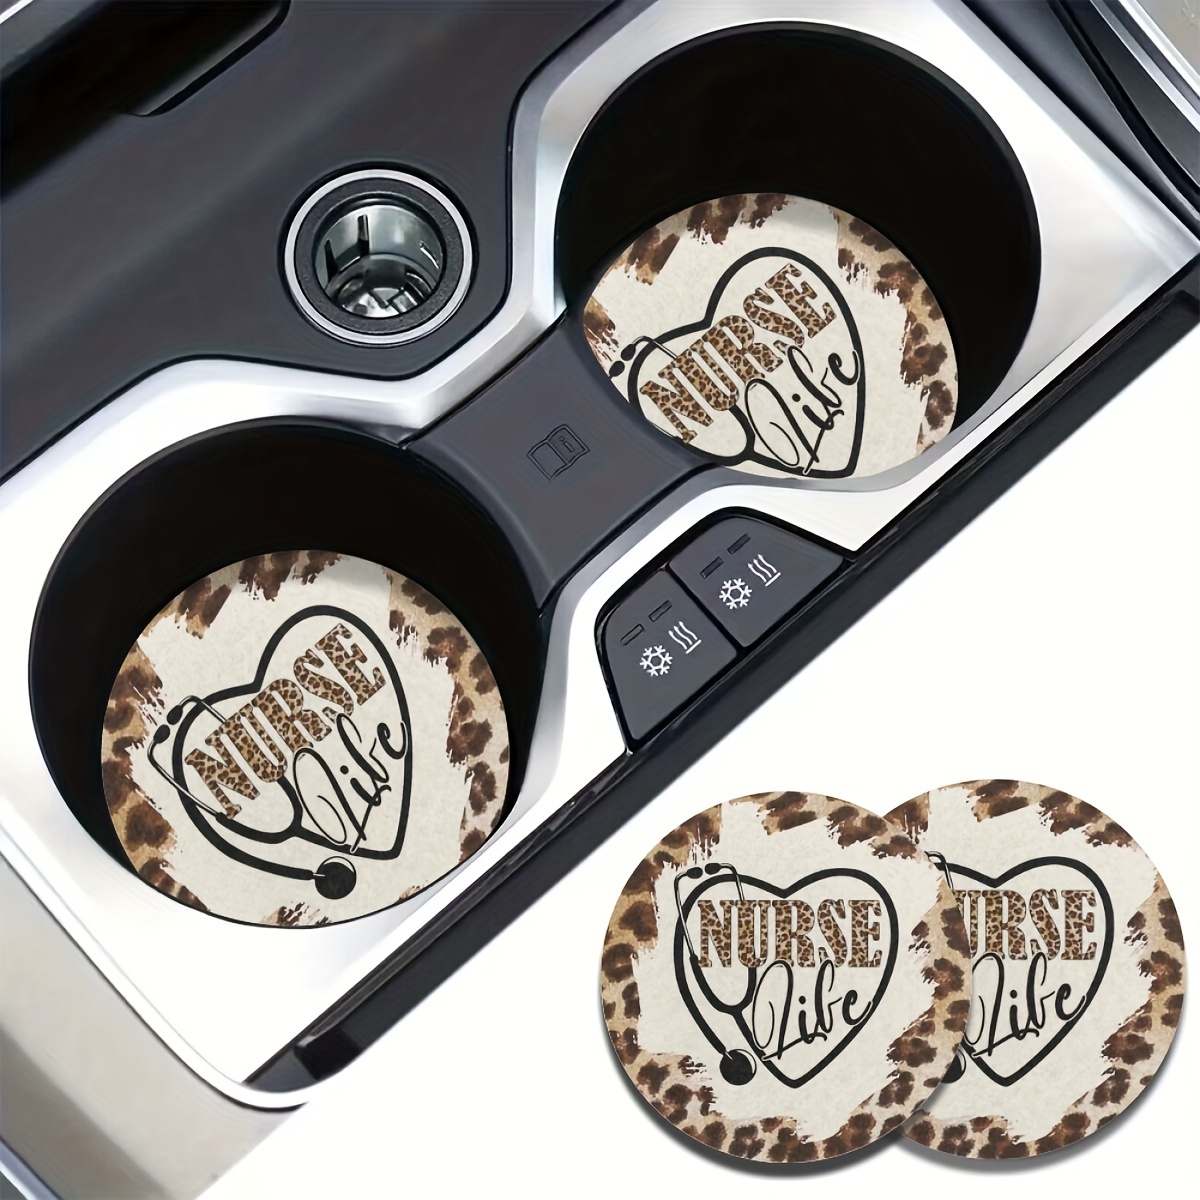 

2pcs Nurse & Leopard Absorbent Car Cup Holder Coaster Mats - Car Interior Accessories For Women, Water Cup Coasters For Car Vehicles & Home Desk